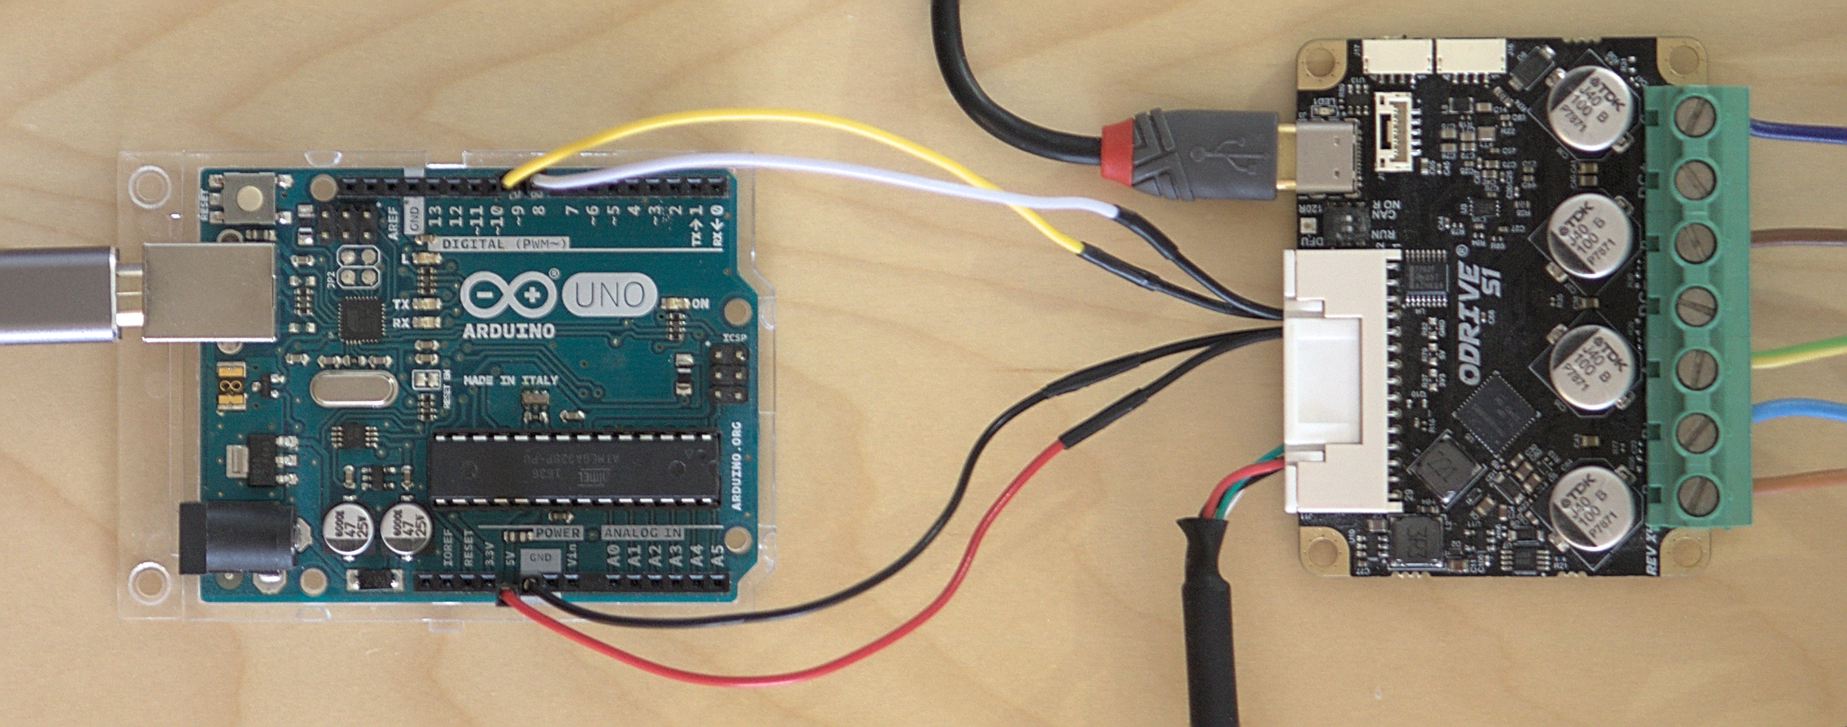 Arduino connected to ODrive S1